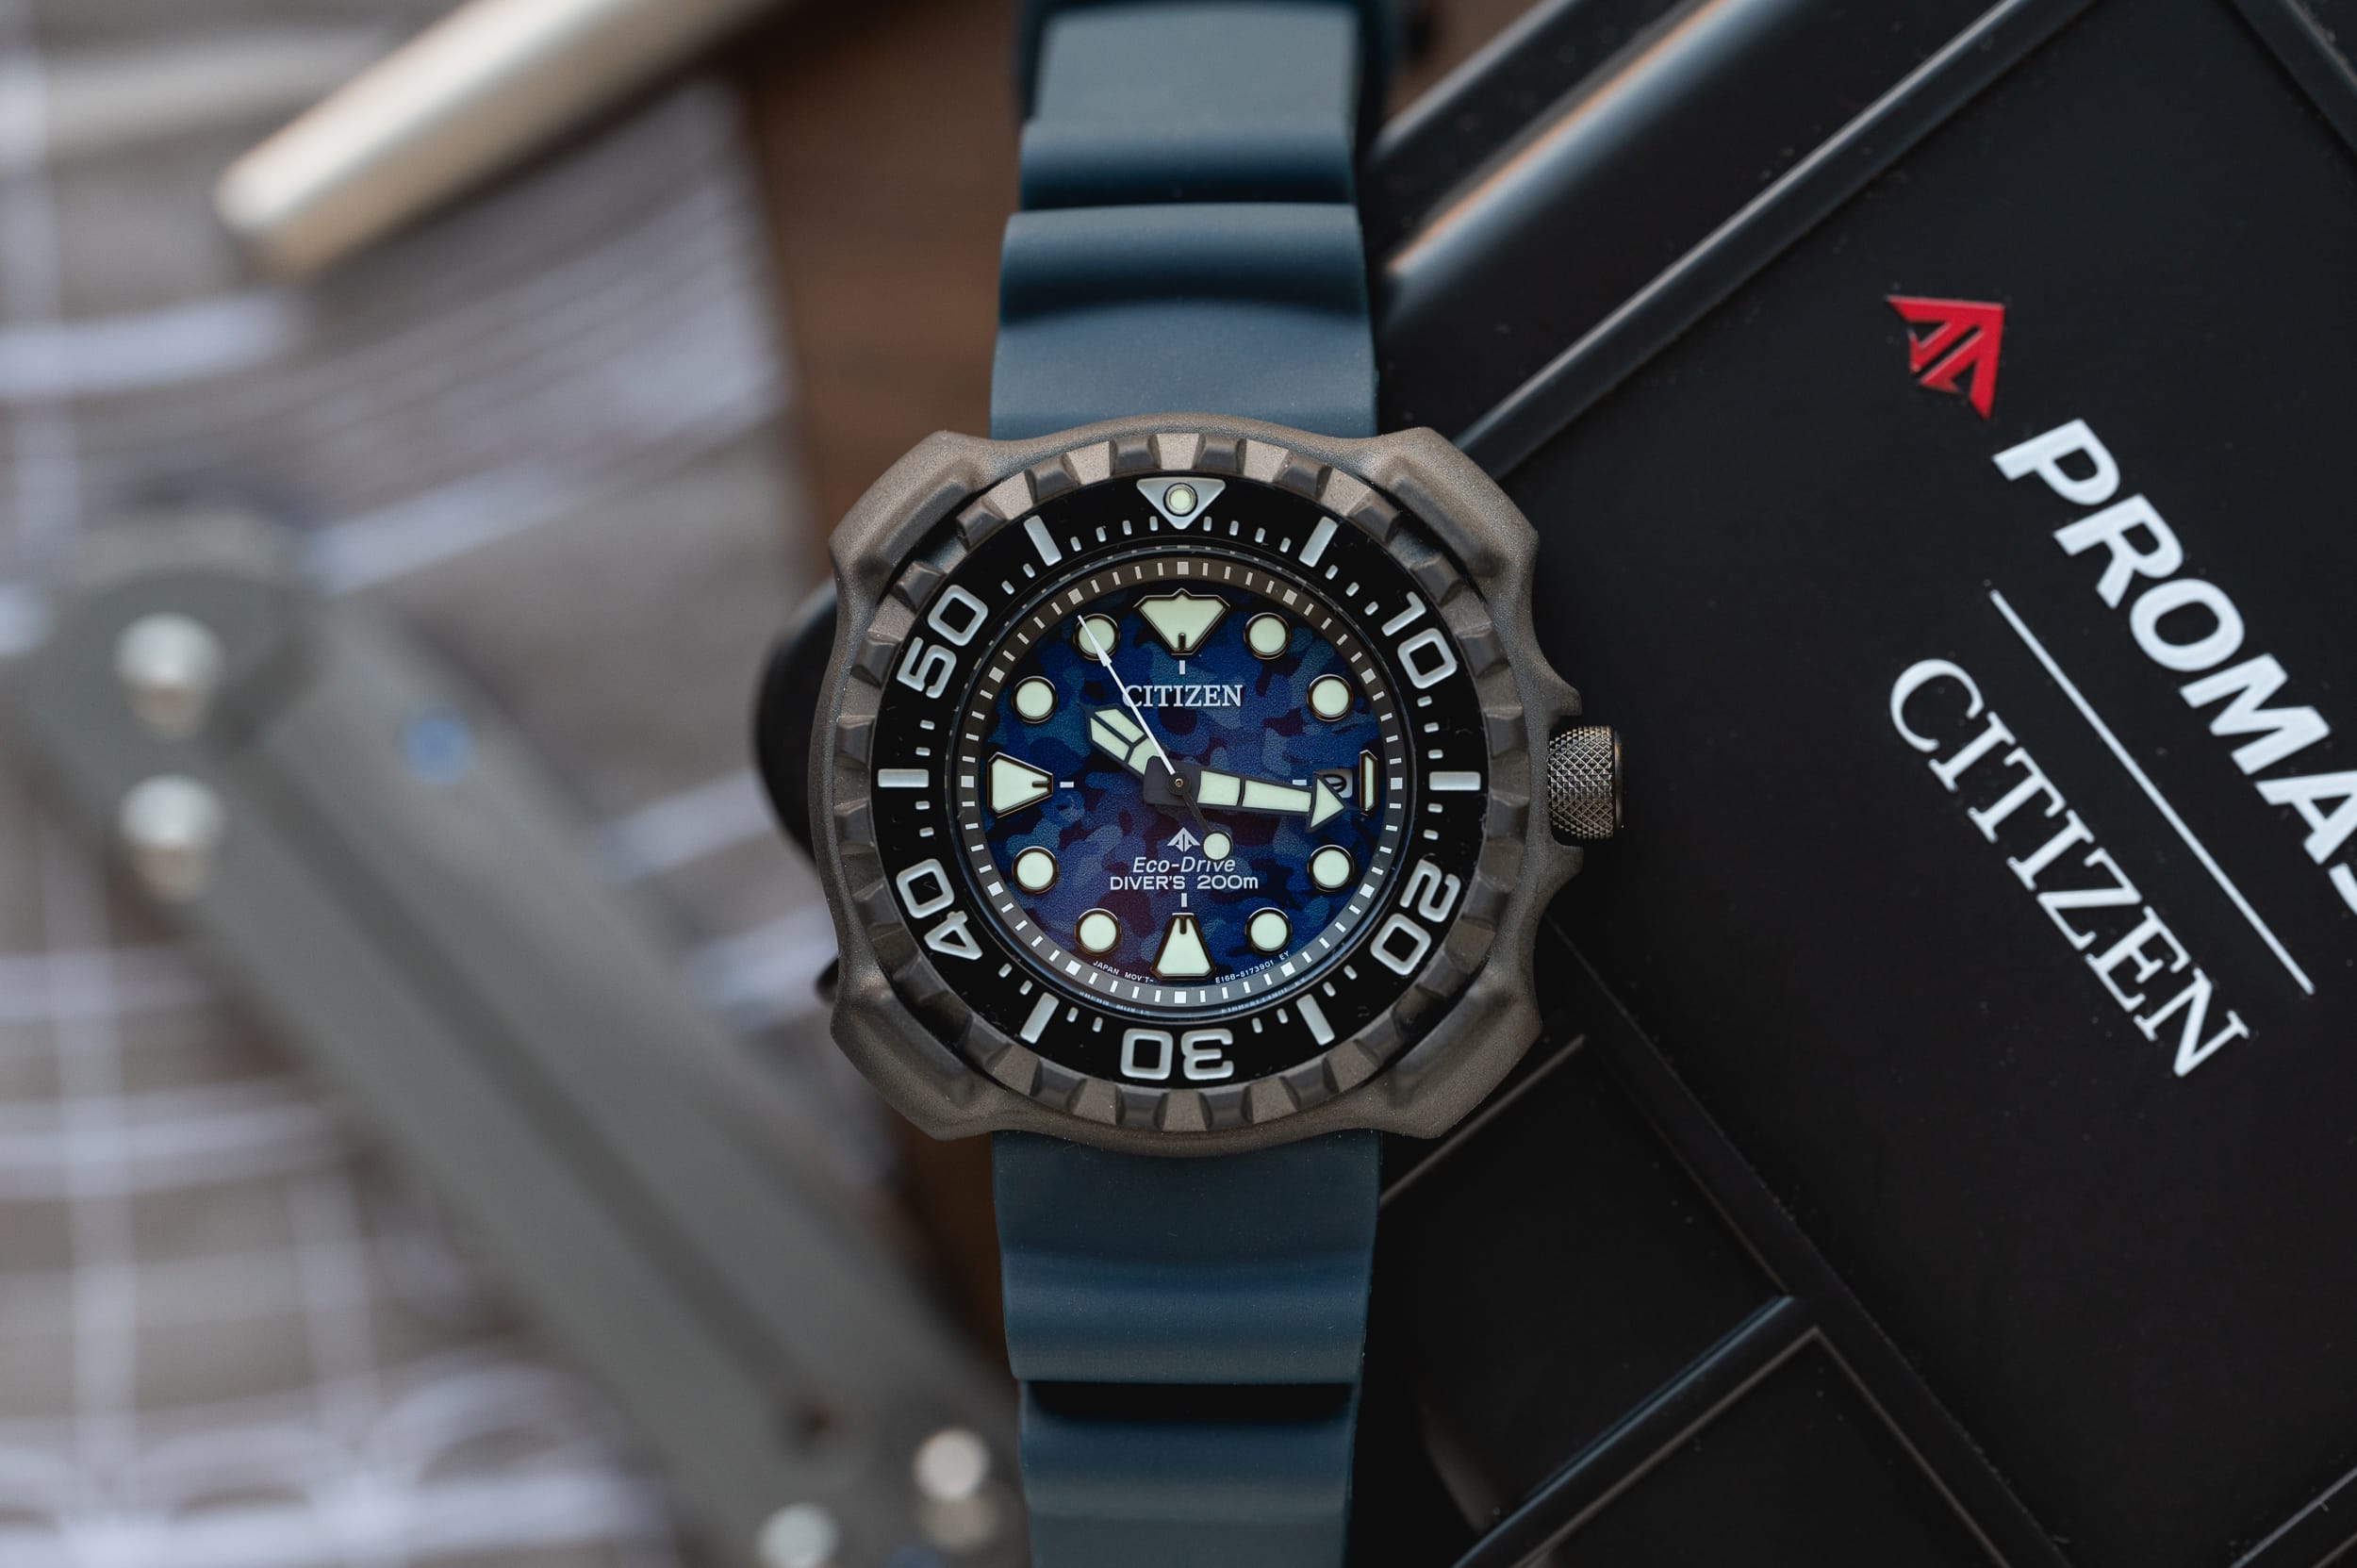 Citizen Diver Review: Worn Assertive BN0227-09L The - Wound Promaster & Approachable Yet